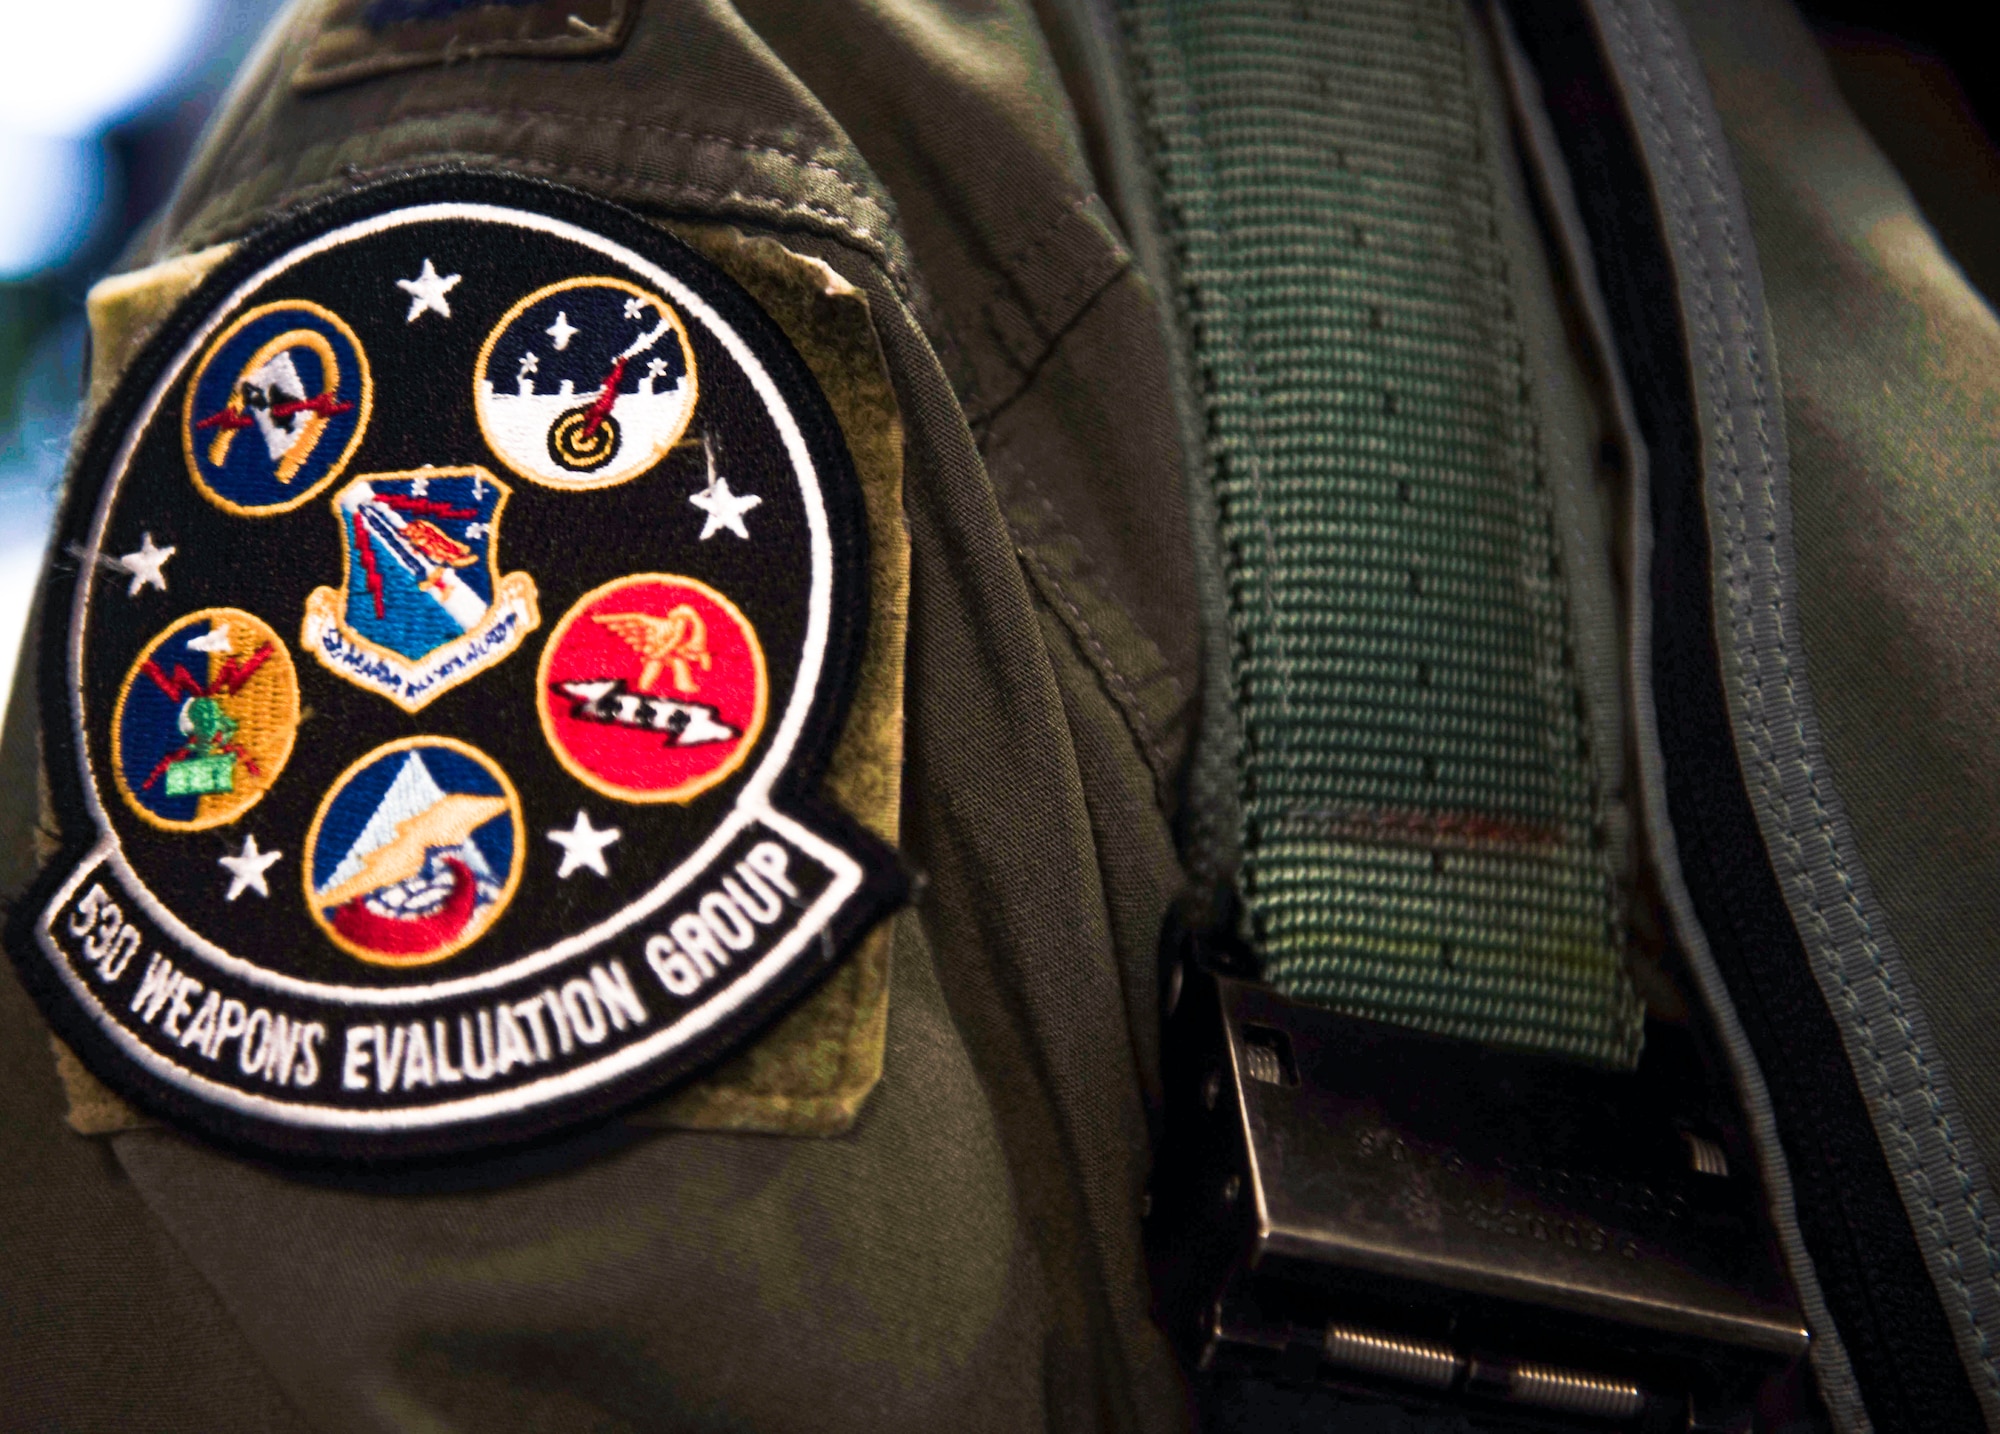 Pictured is a unit patch on the flight suit of U.S. Air Force Col. Nicholas Reed with the 53rd Weapons Evaluation Group, commander, at Tyndall Air Force Base, Florida, Aug. 21, 2020. Reed, and multiple other pilots, rushed to evacuate QF-16 aircraft to Shaw Air Force Base, South Carolina, in preparation for storm conditions. (U.S. Air Force photo by Staff Sgt. Magen M. Reeves)